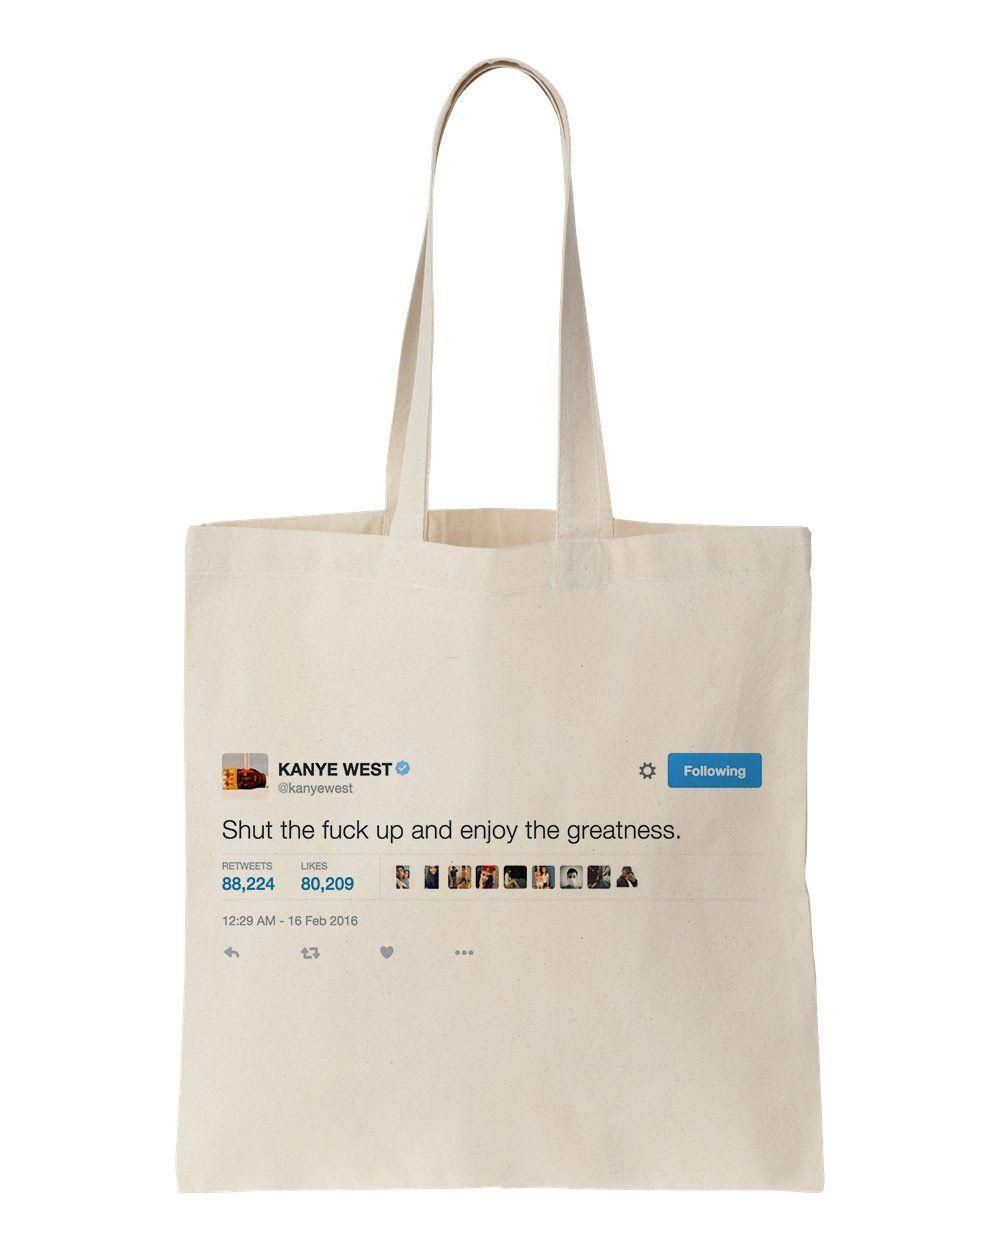 Kanye West On Internet Printed Tote Bag Birthday Gift For People